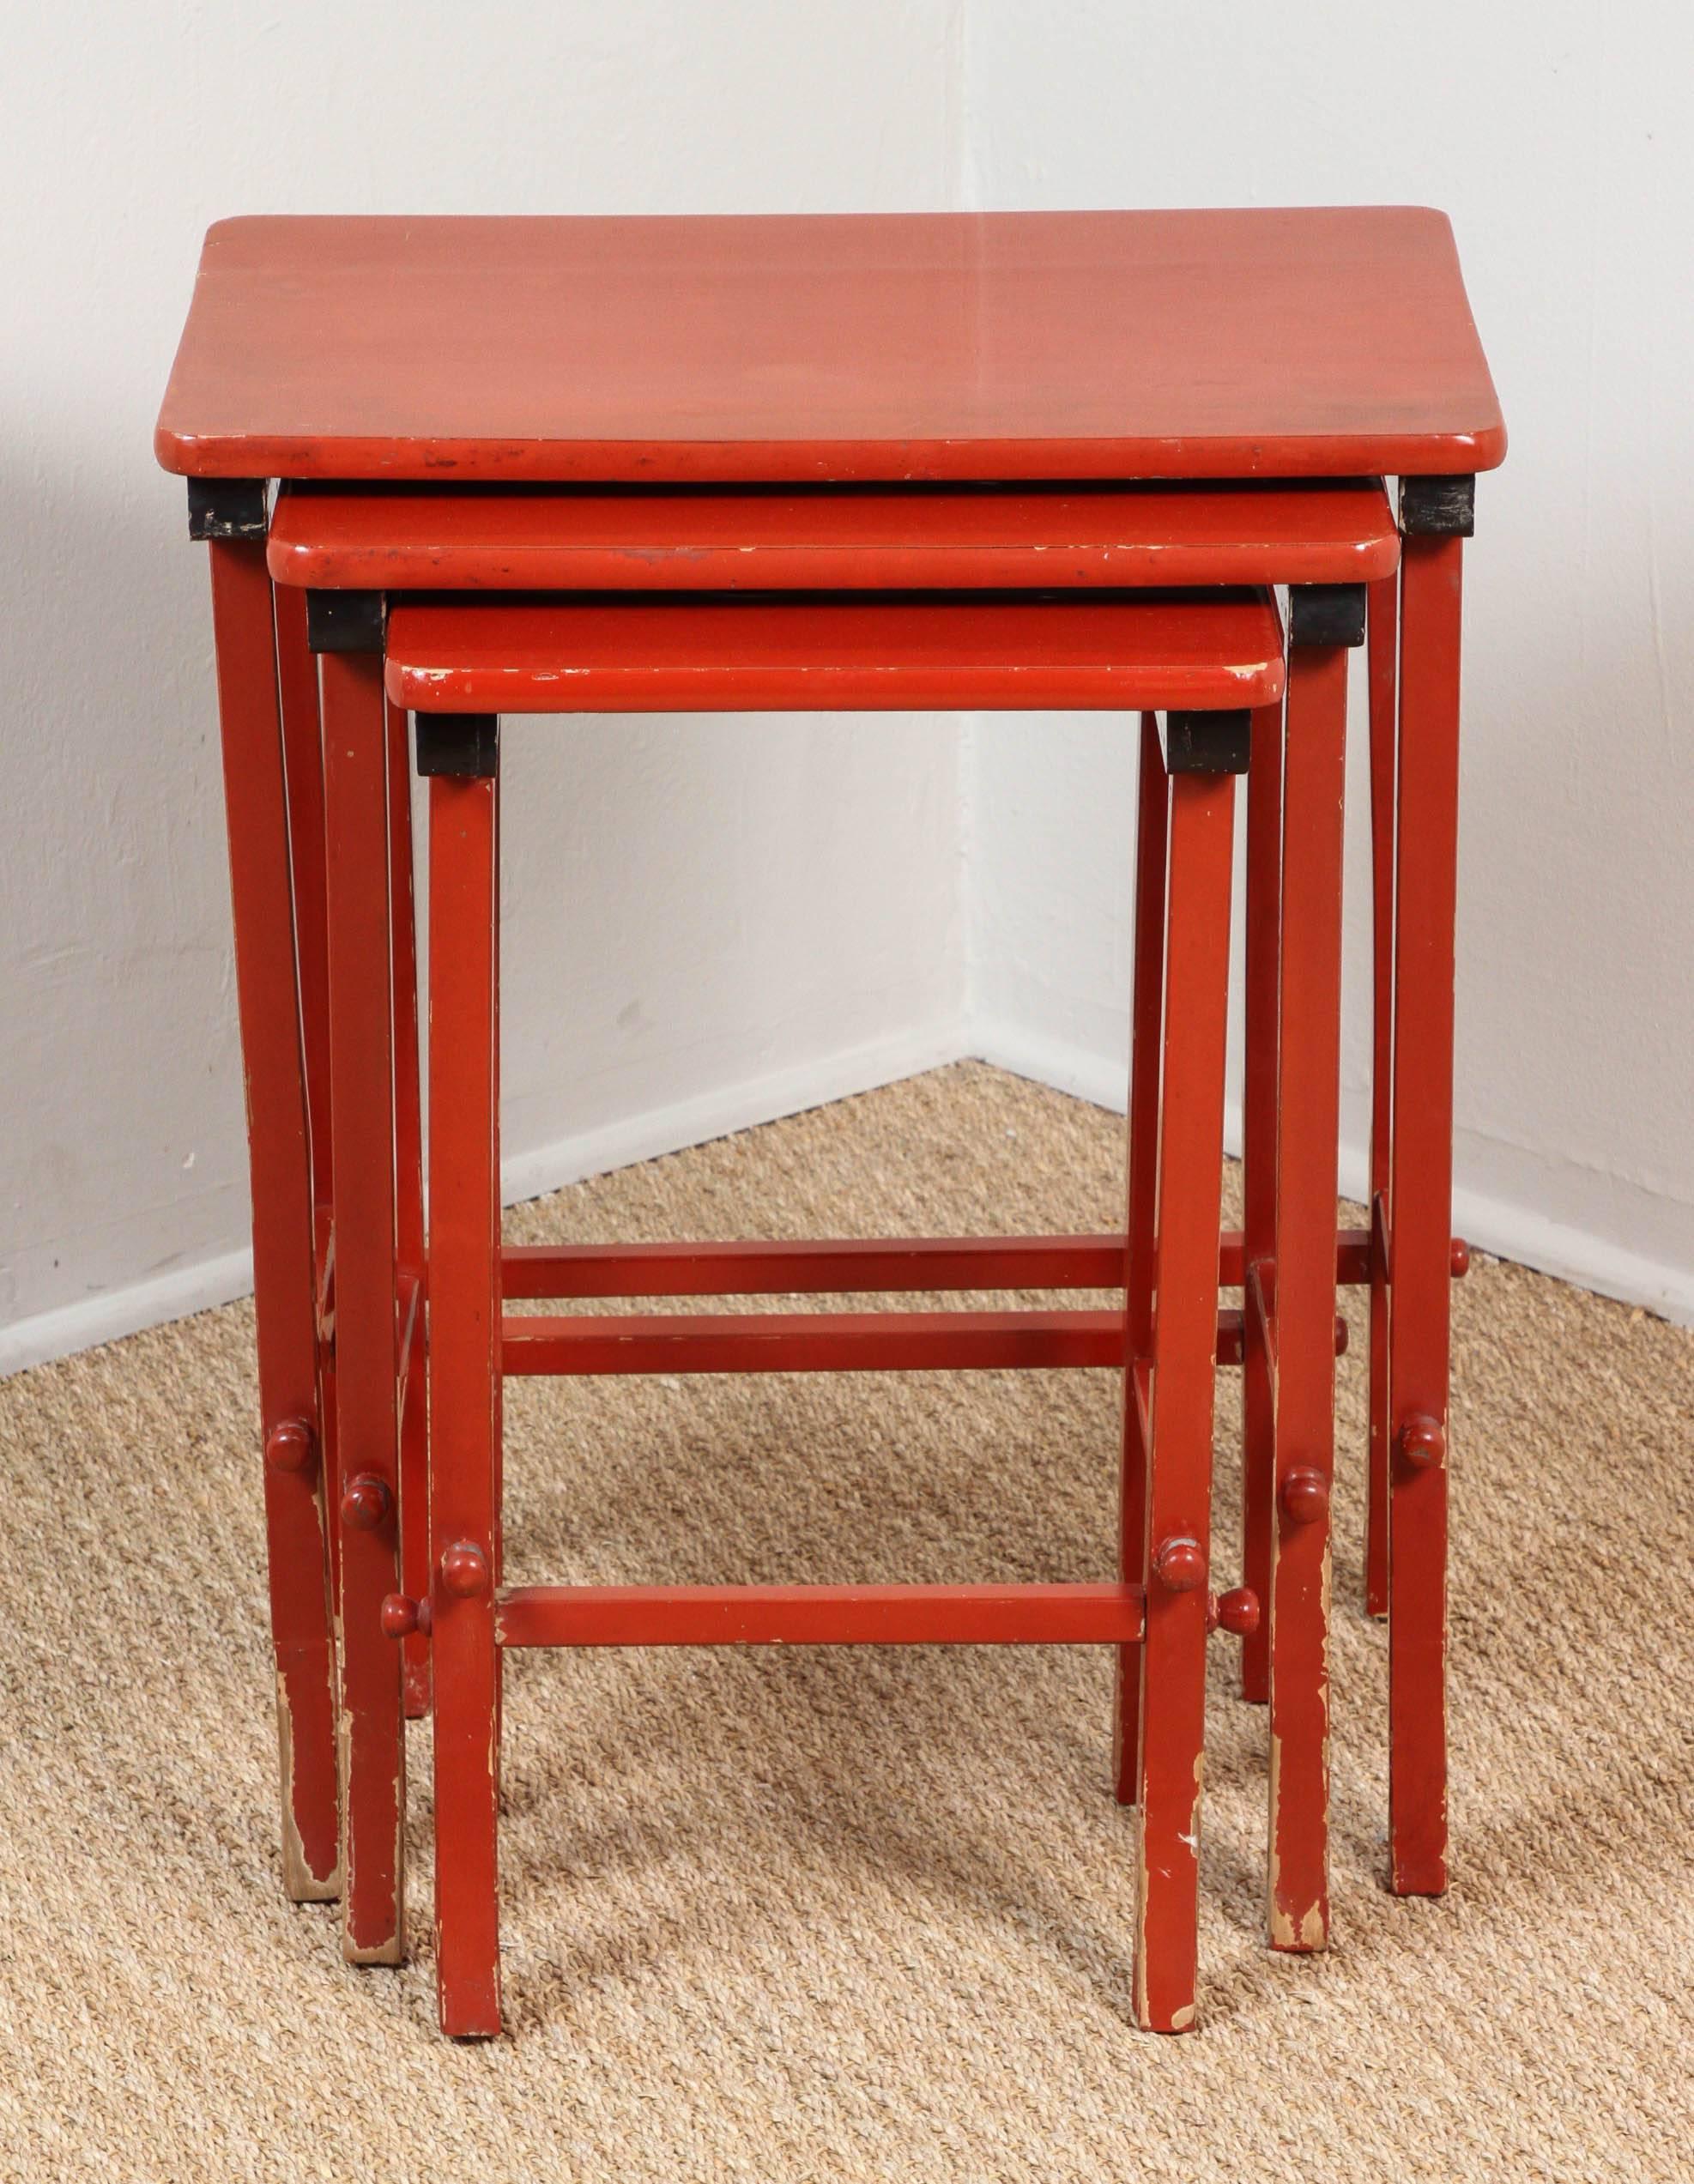 Set of three slightly distressed red and black lacquer nesting tables.